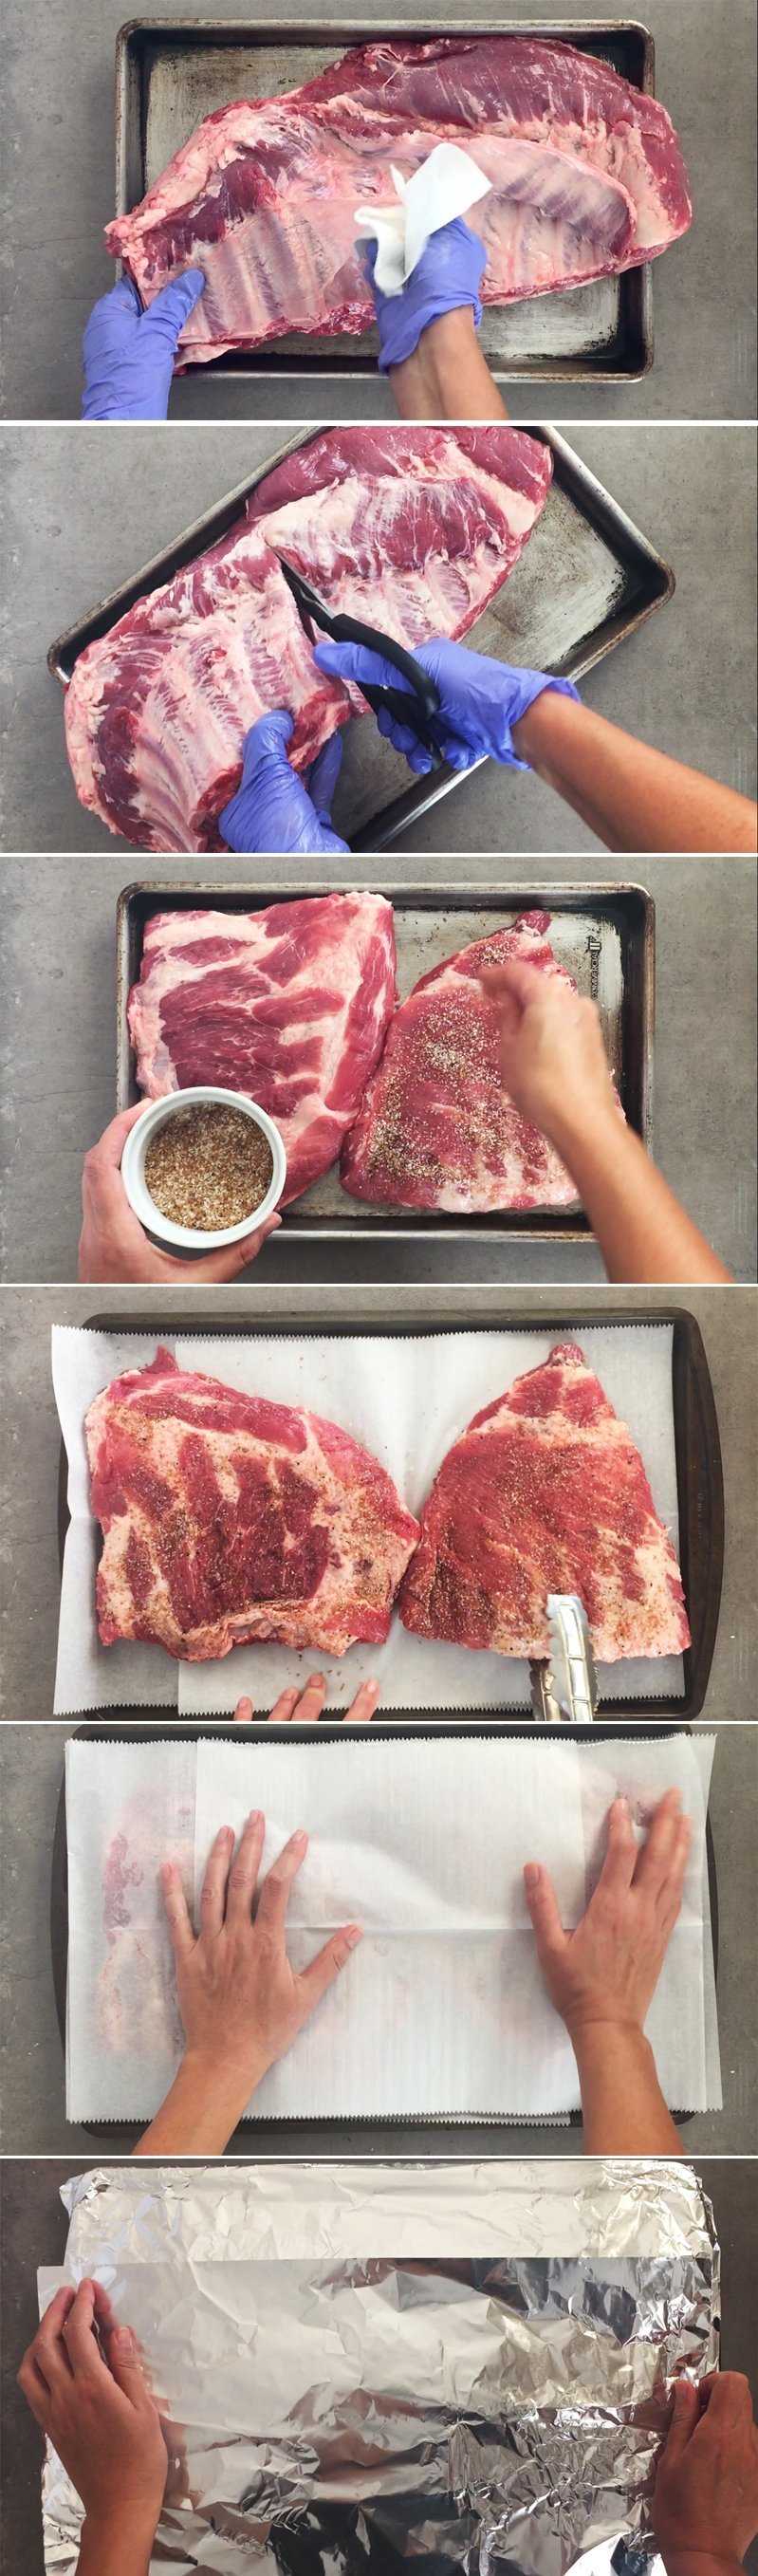 How to cook ribs in the oven - step-by-step.